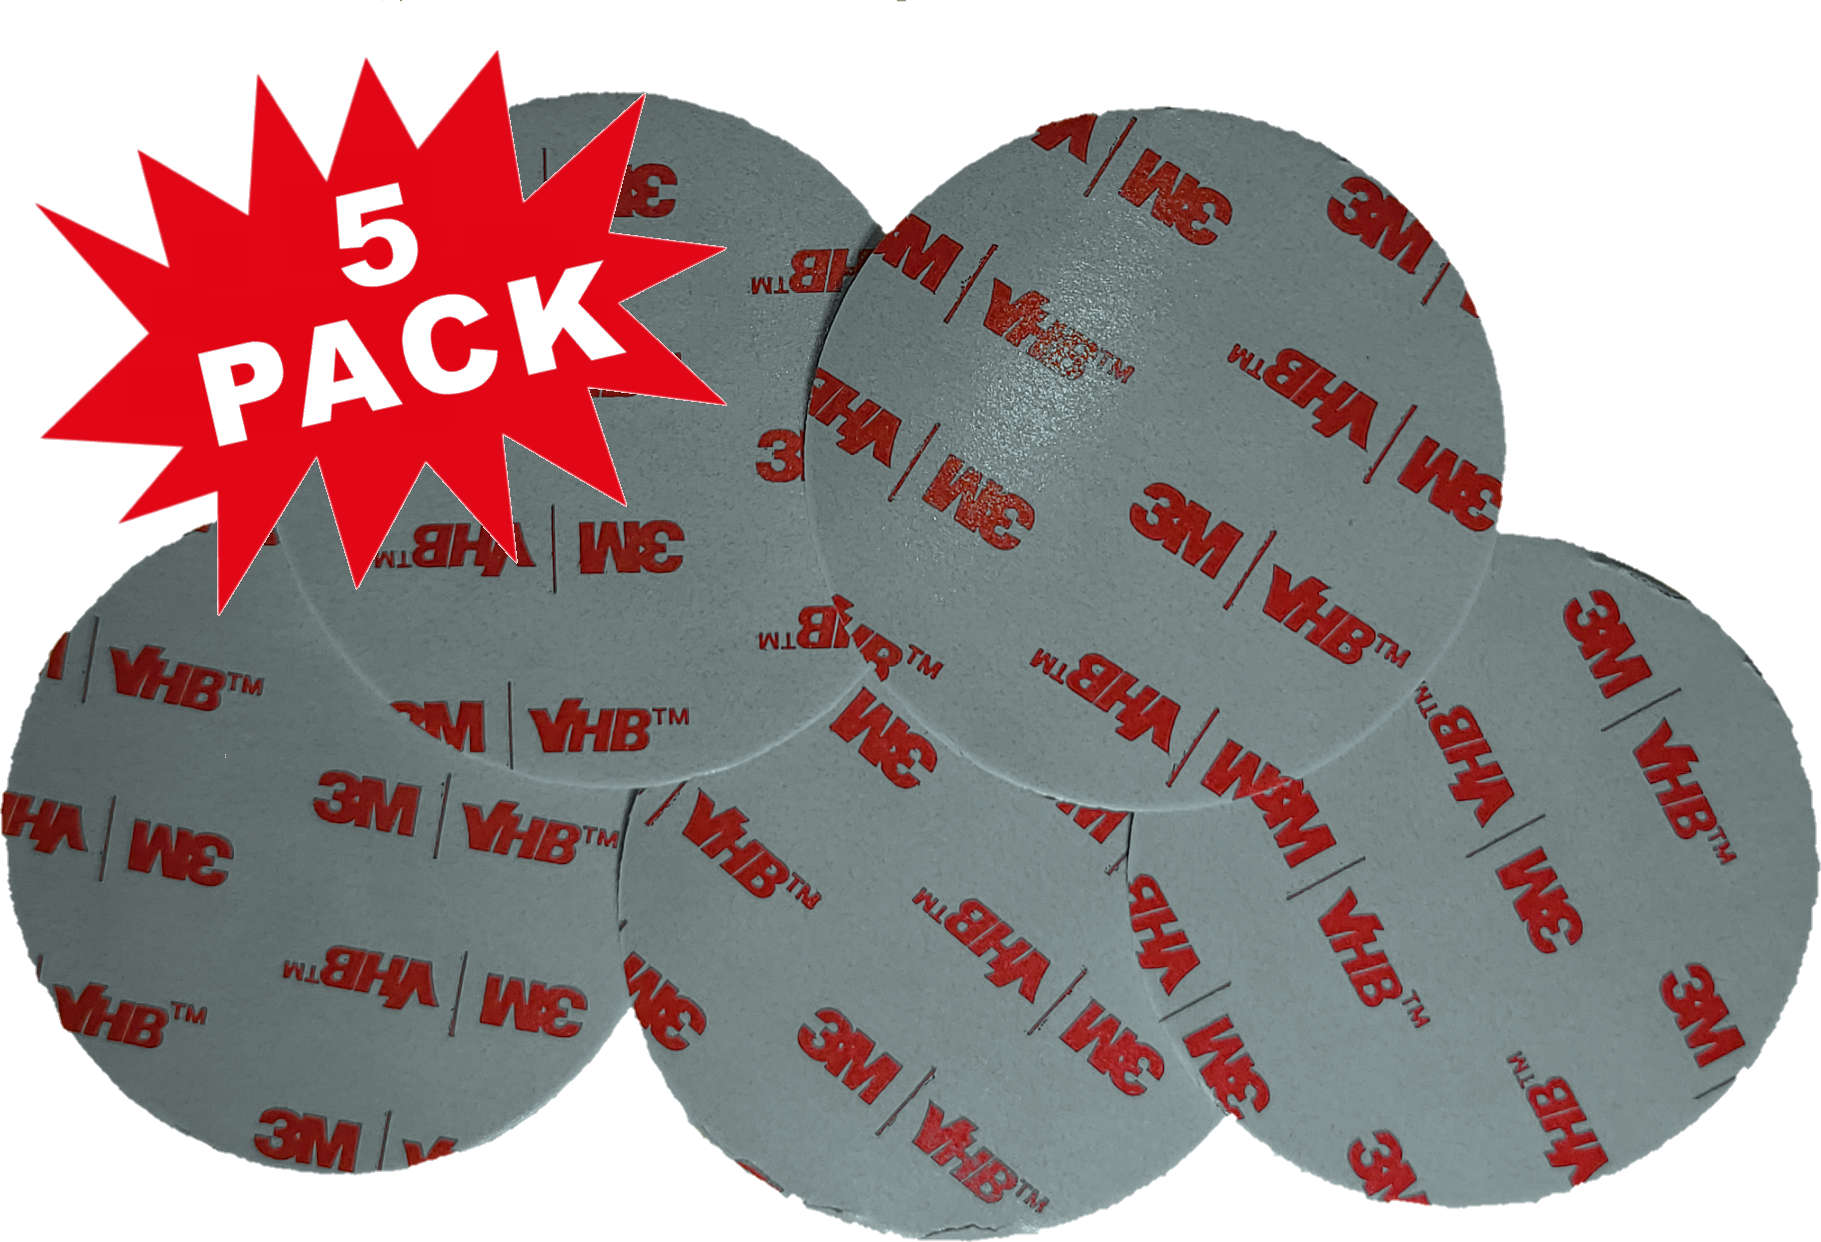 3M VHB Adhesive Pads, Double Sided Adhesive Mounting Squares 2in